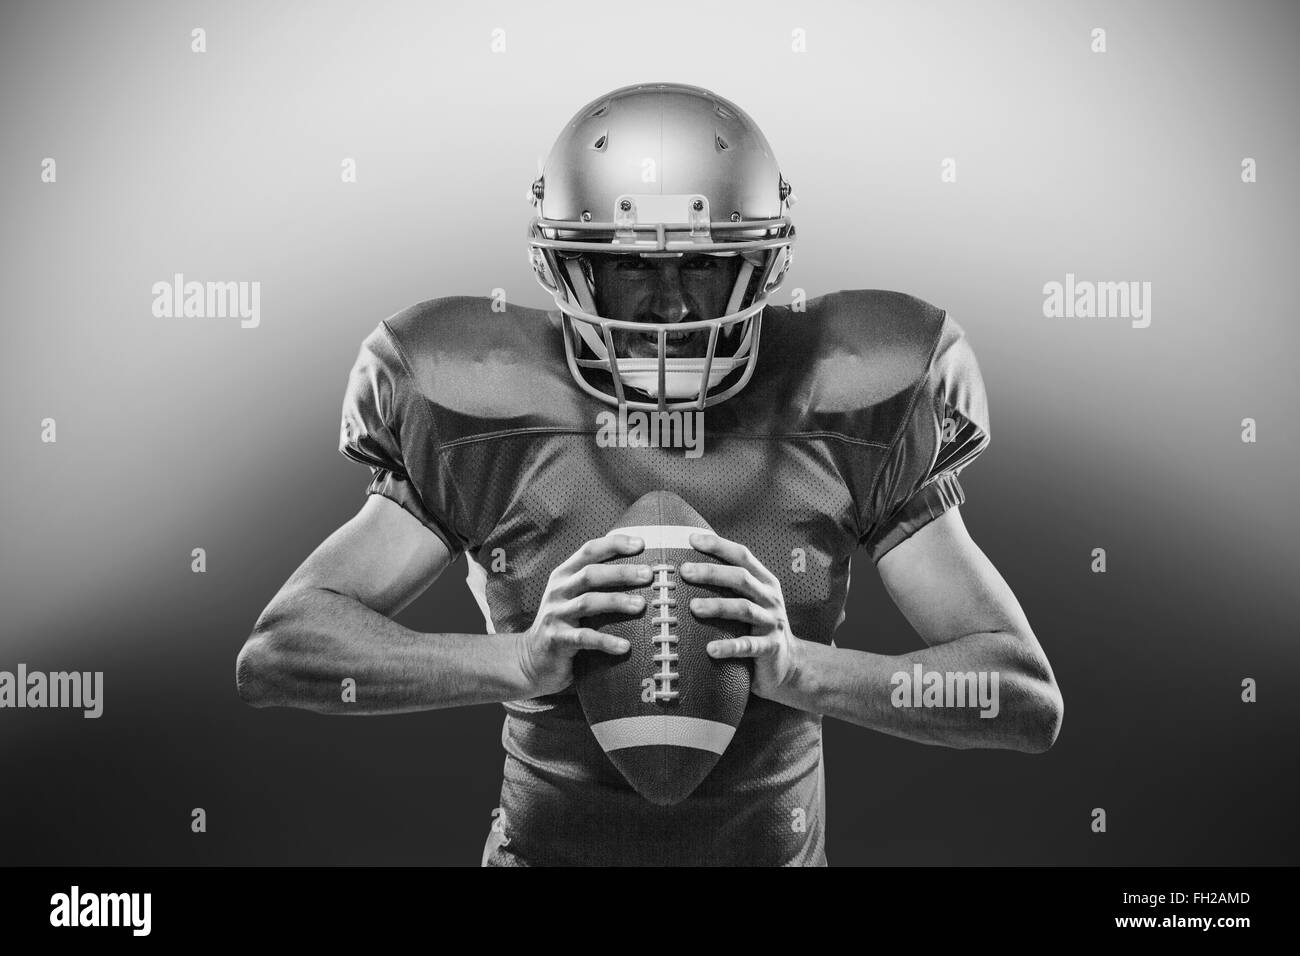 American football player in red jersey and helmet holding ball Stock Photo